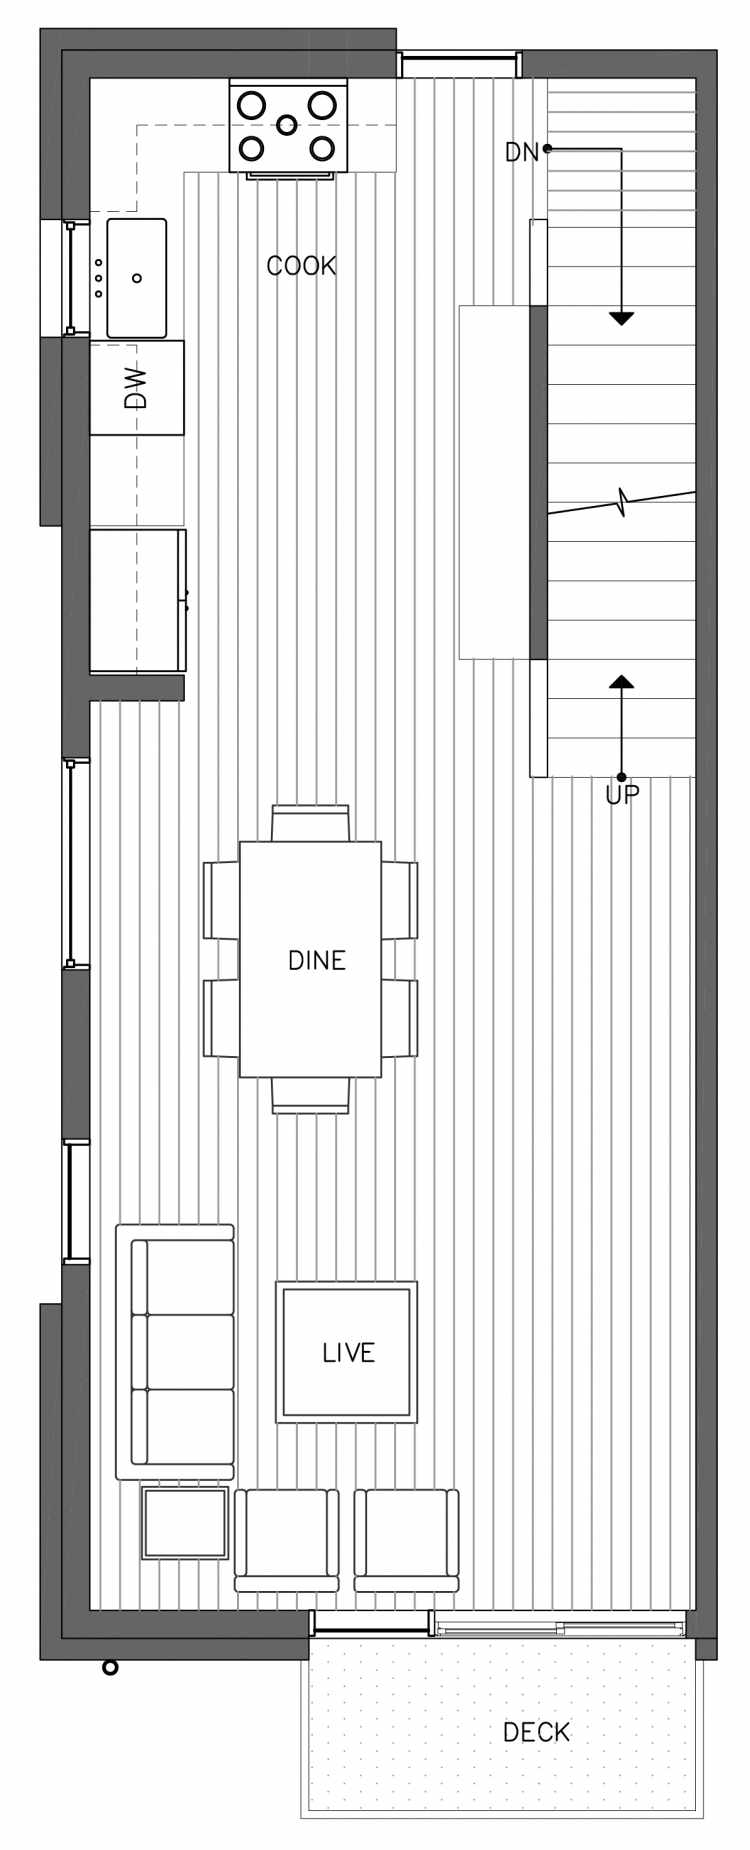 Second Floor Plan of 3236C 14th Ave W, One of the Harloe Townhomes in North Queen Anne by Isola Homes